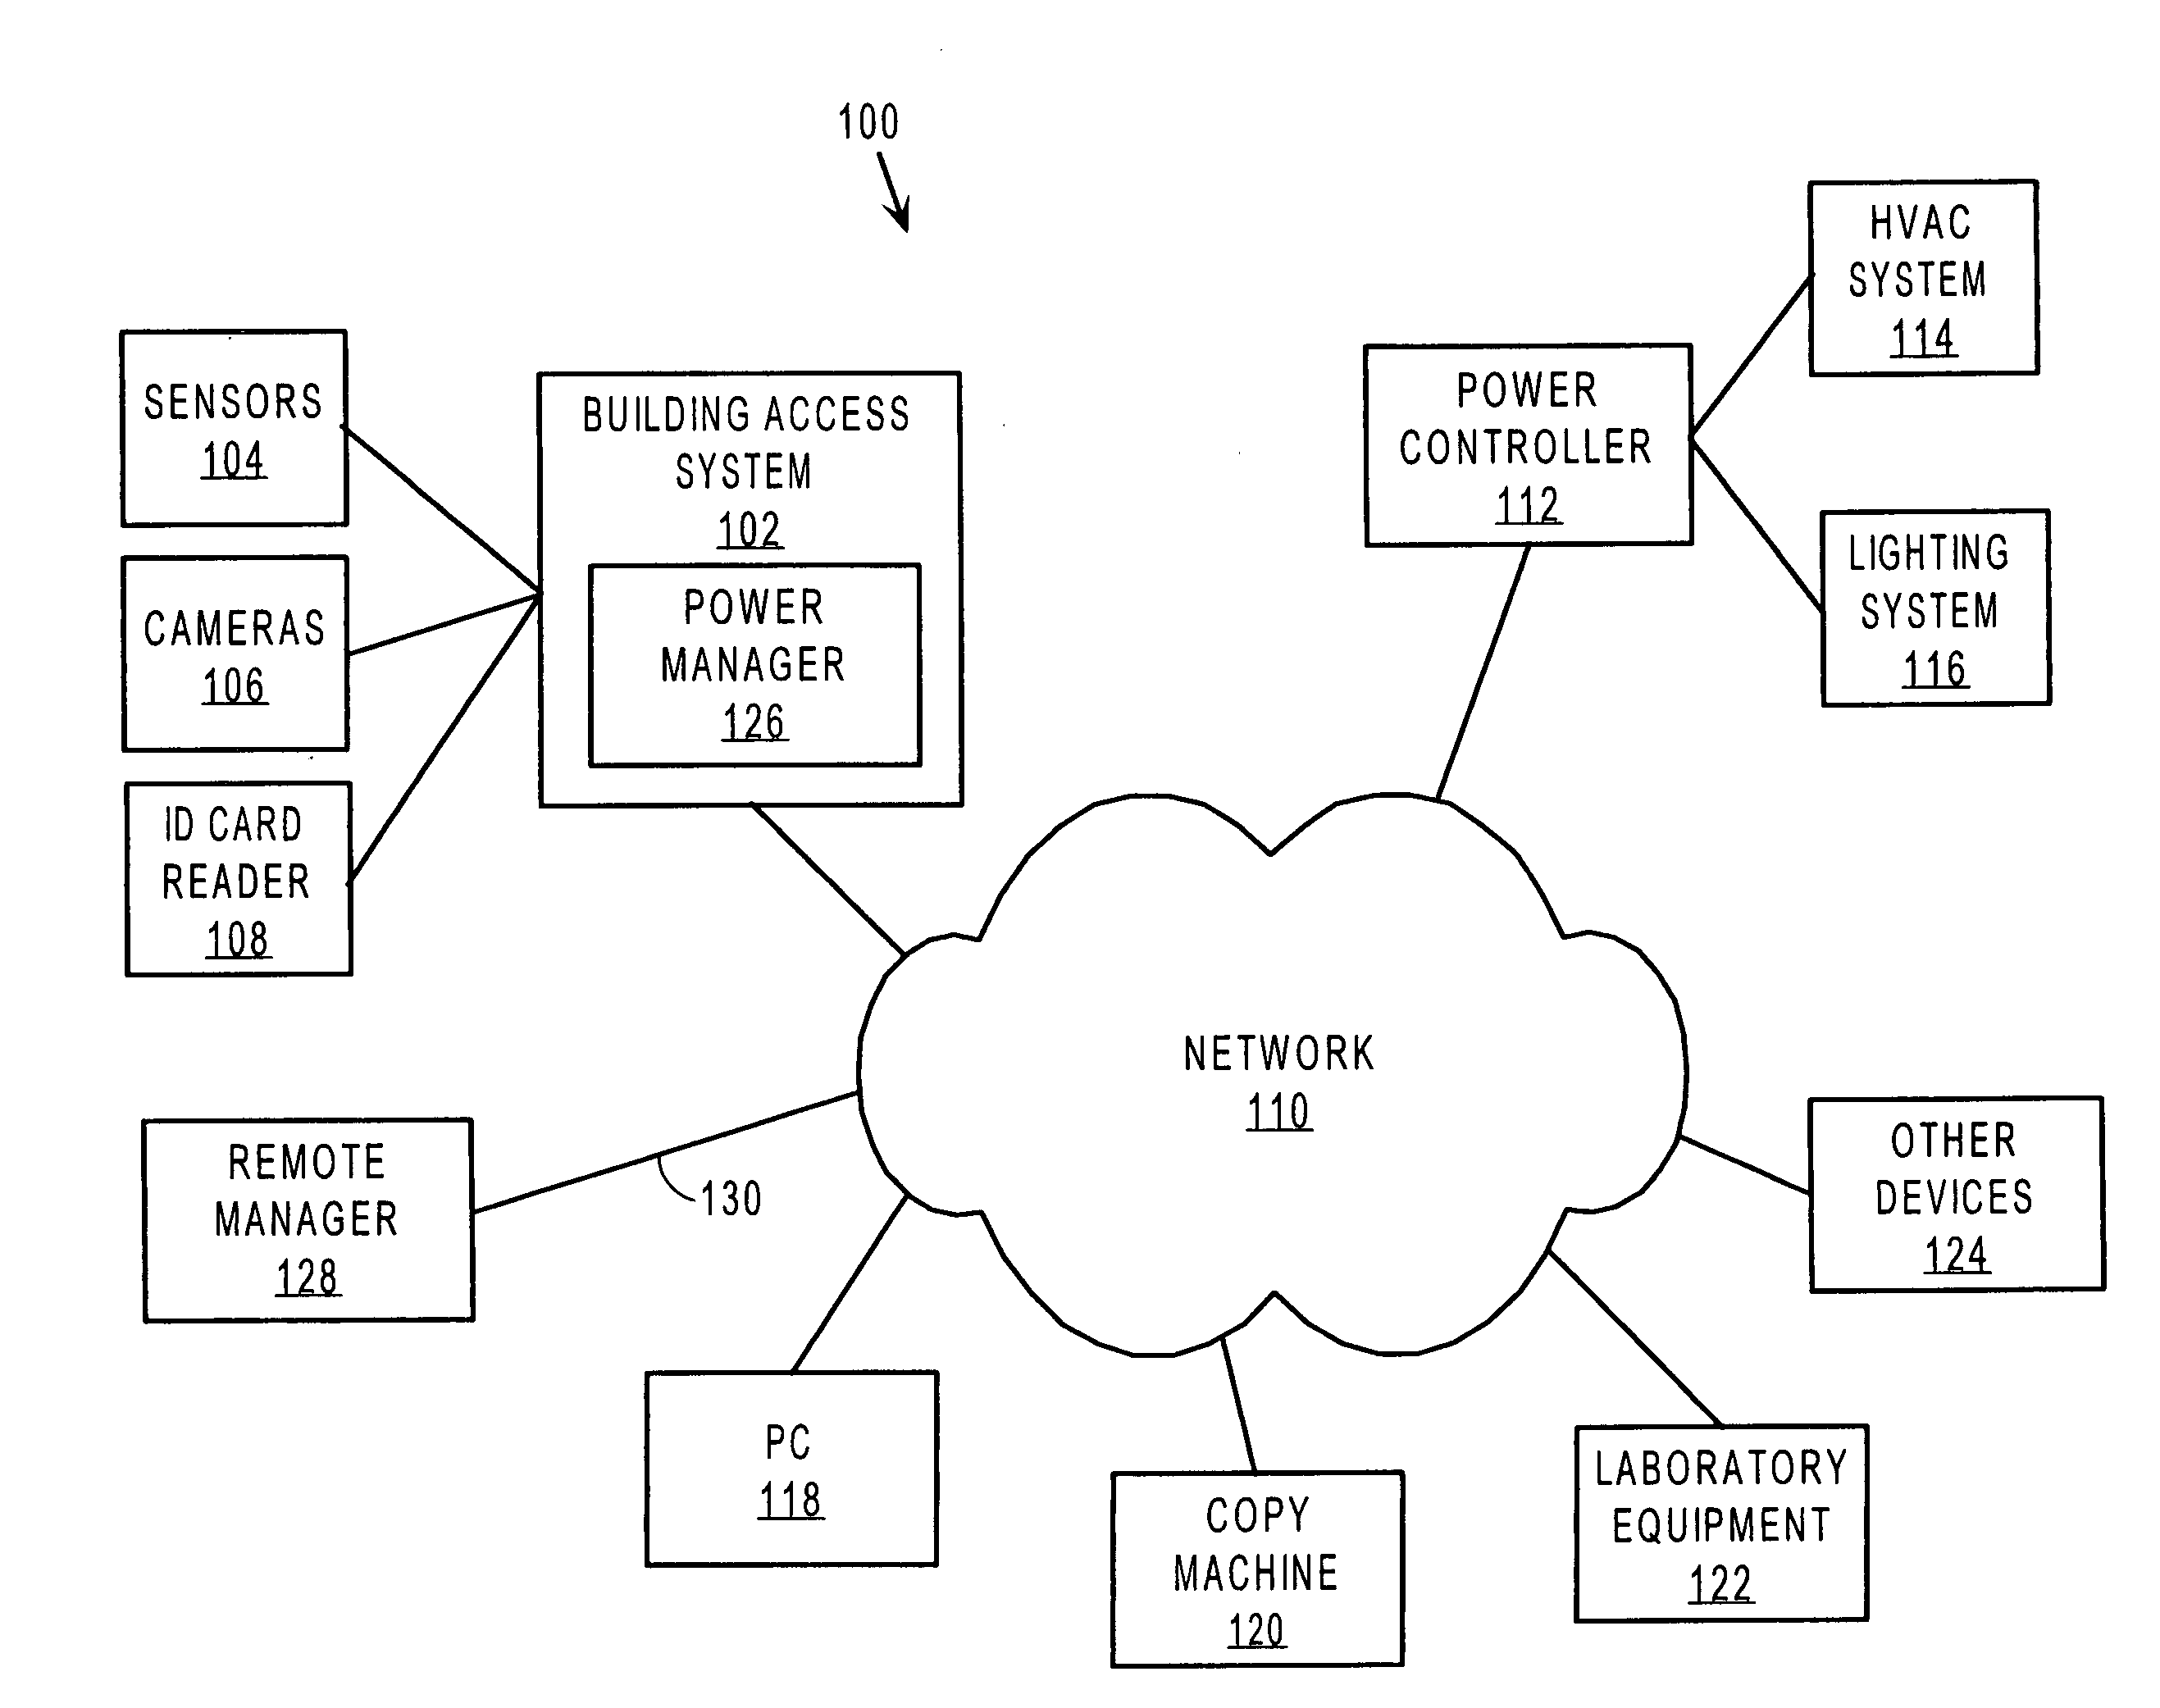 Method of pre-activating network devices based upon previous usage data